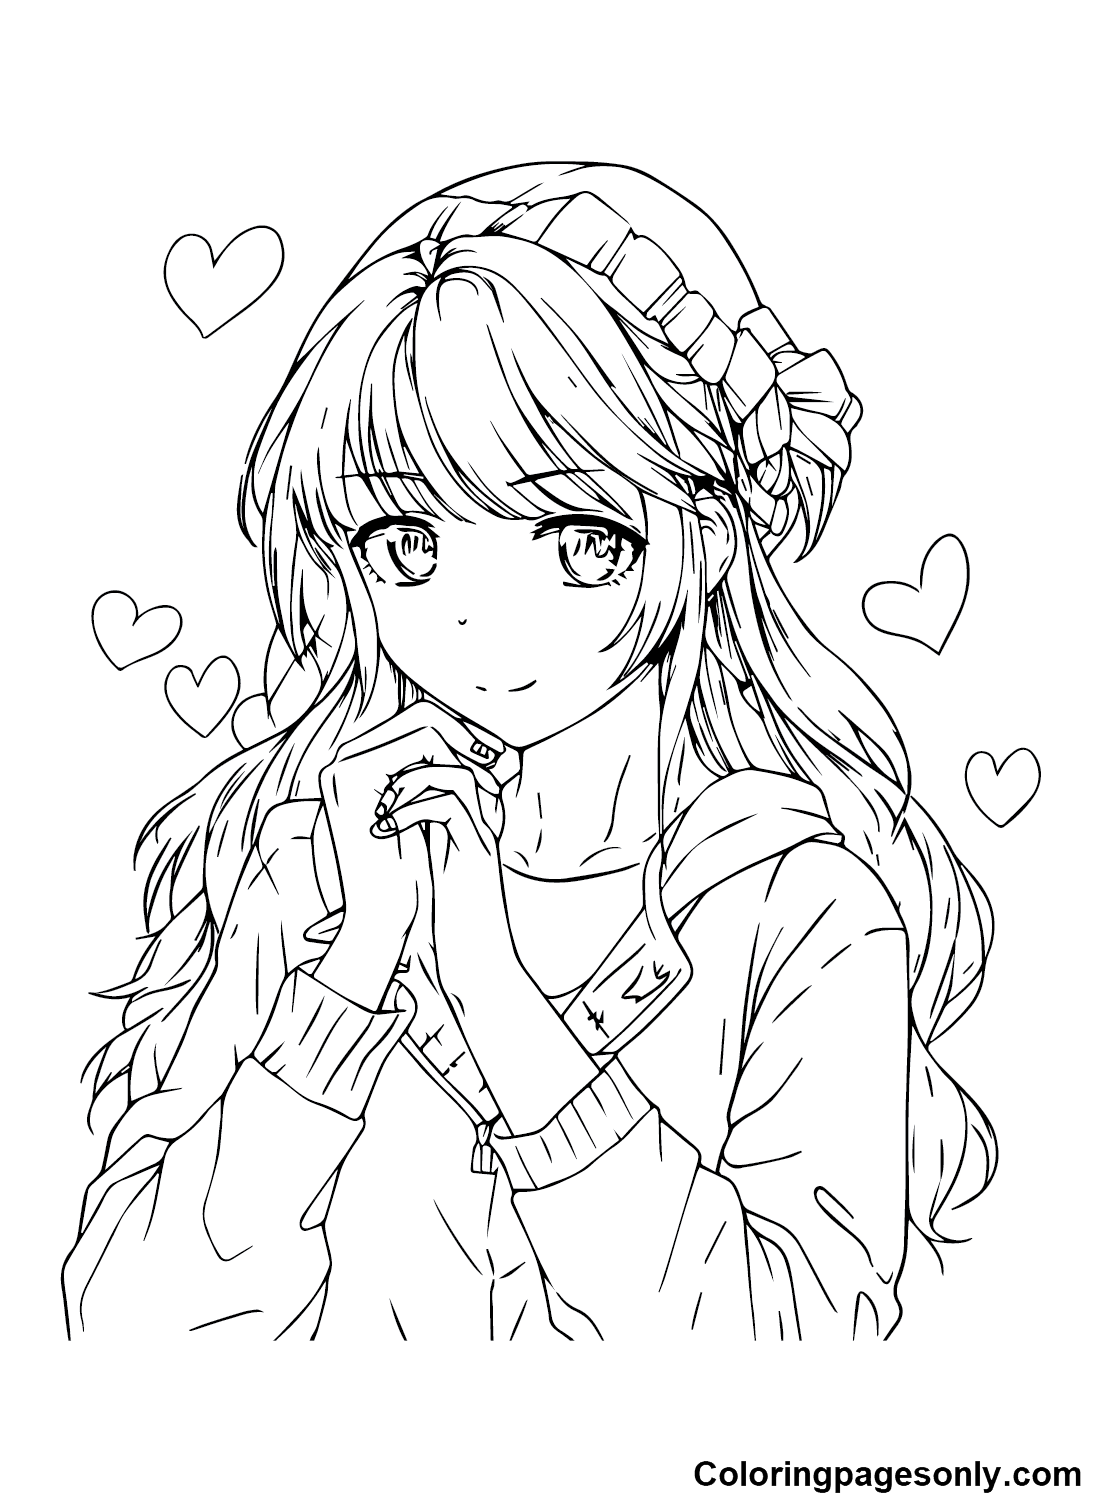 Find hd Cute Anime Girl Coloring Pages - Transparent Anime Line Art, HD Png  Download. To search and … | Coloring pages for girls, Anime lineart, Cute  coloring pages